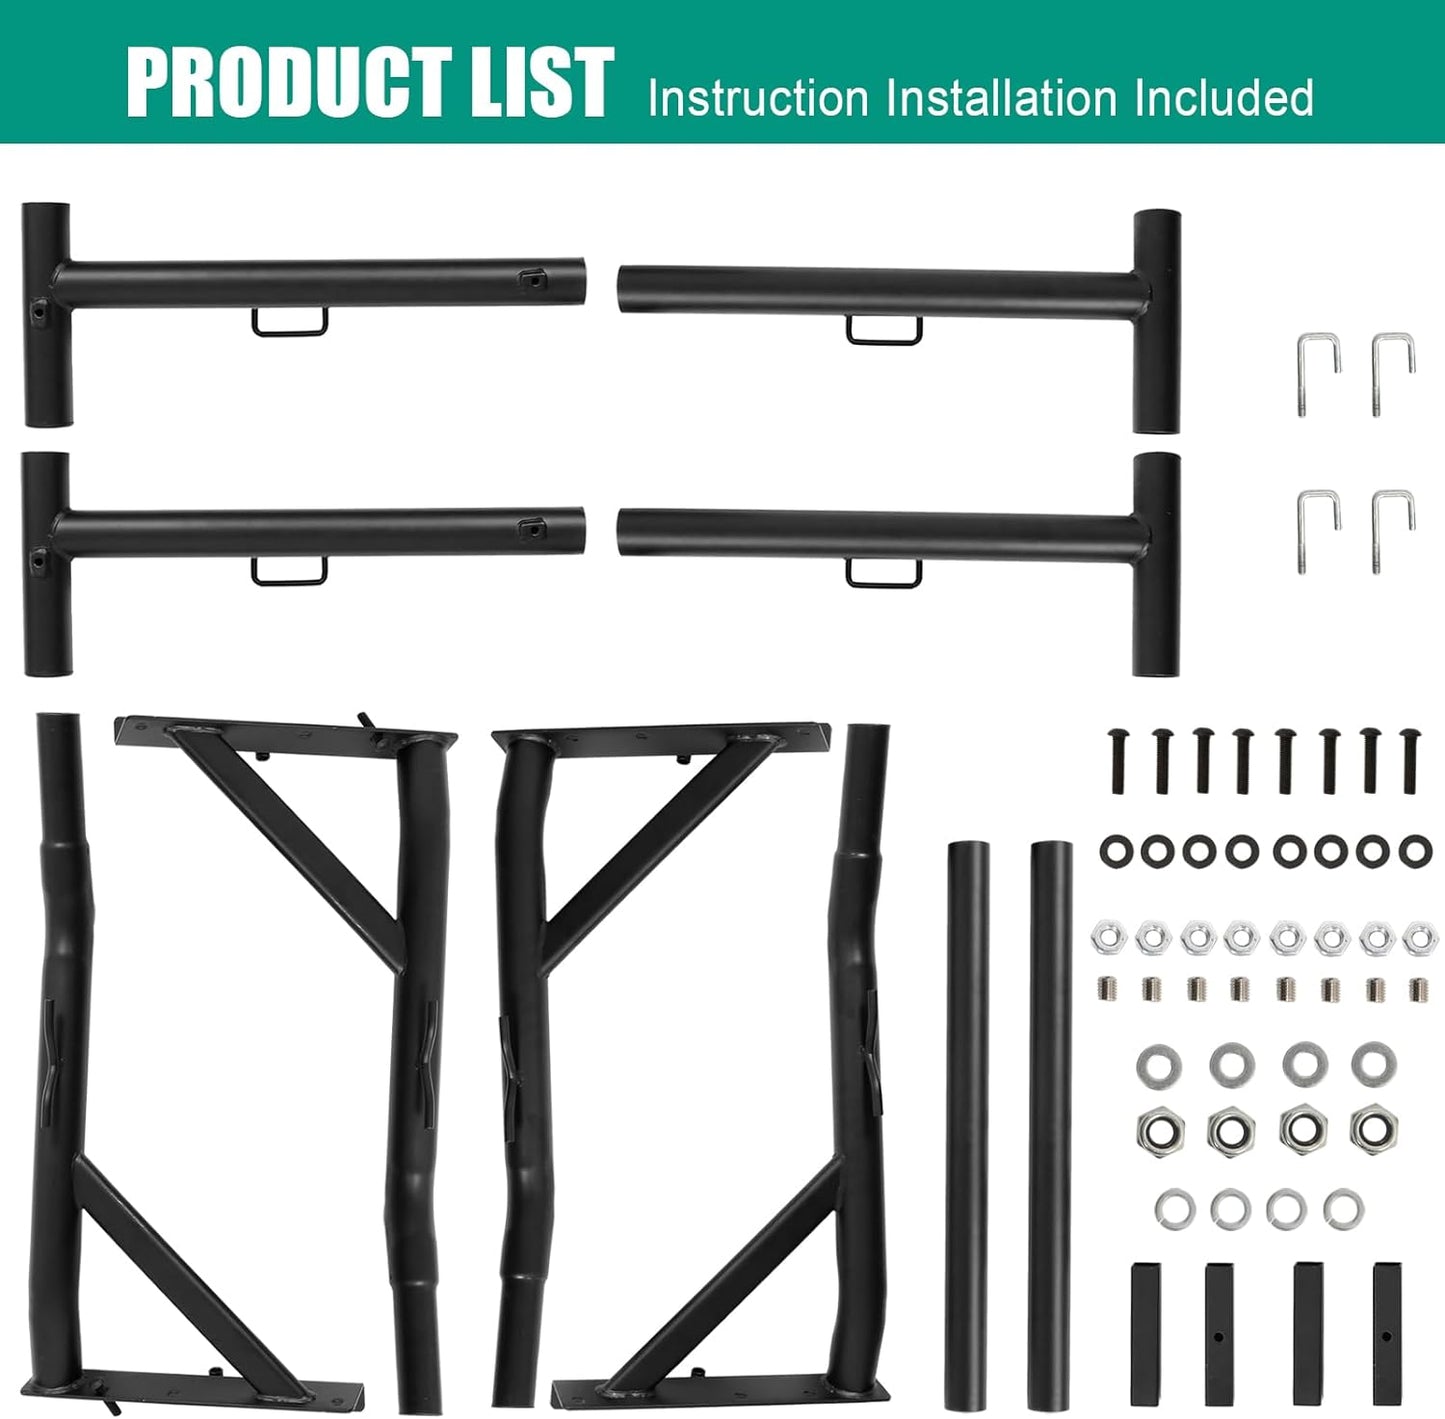 Non-Drilling Truck Rack Fit for 52" to 71" Wide Truck Bed, 800 lb. Capacity